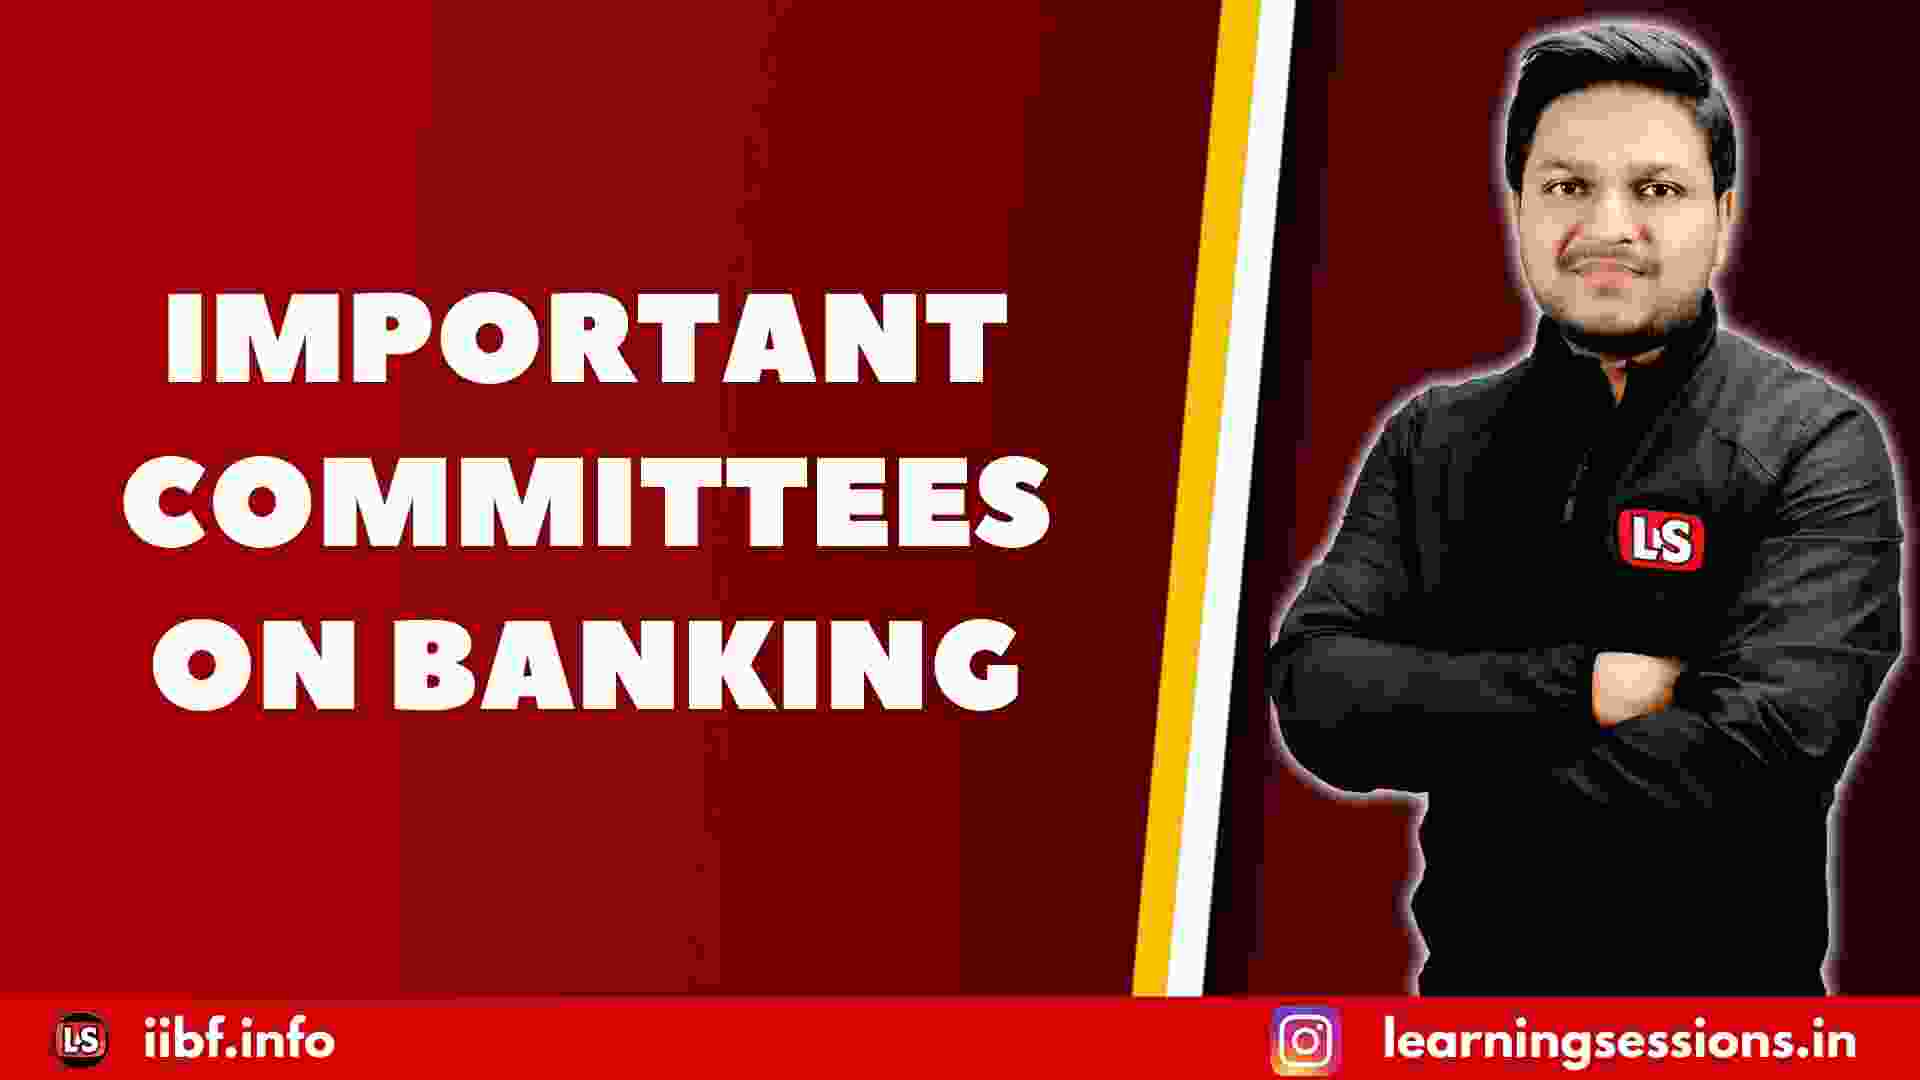 IMPORTANT COMMITTEES ON BANKING